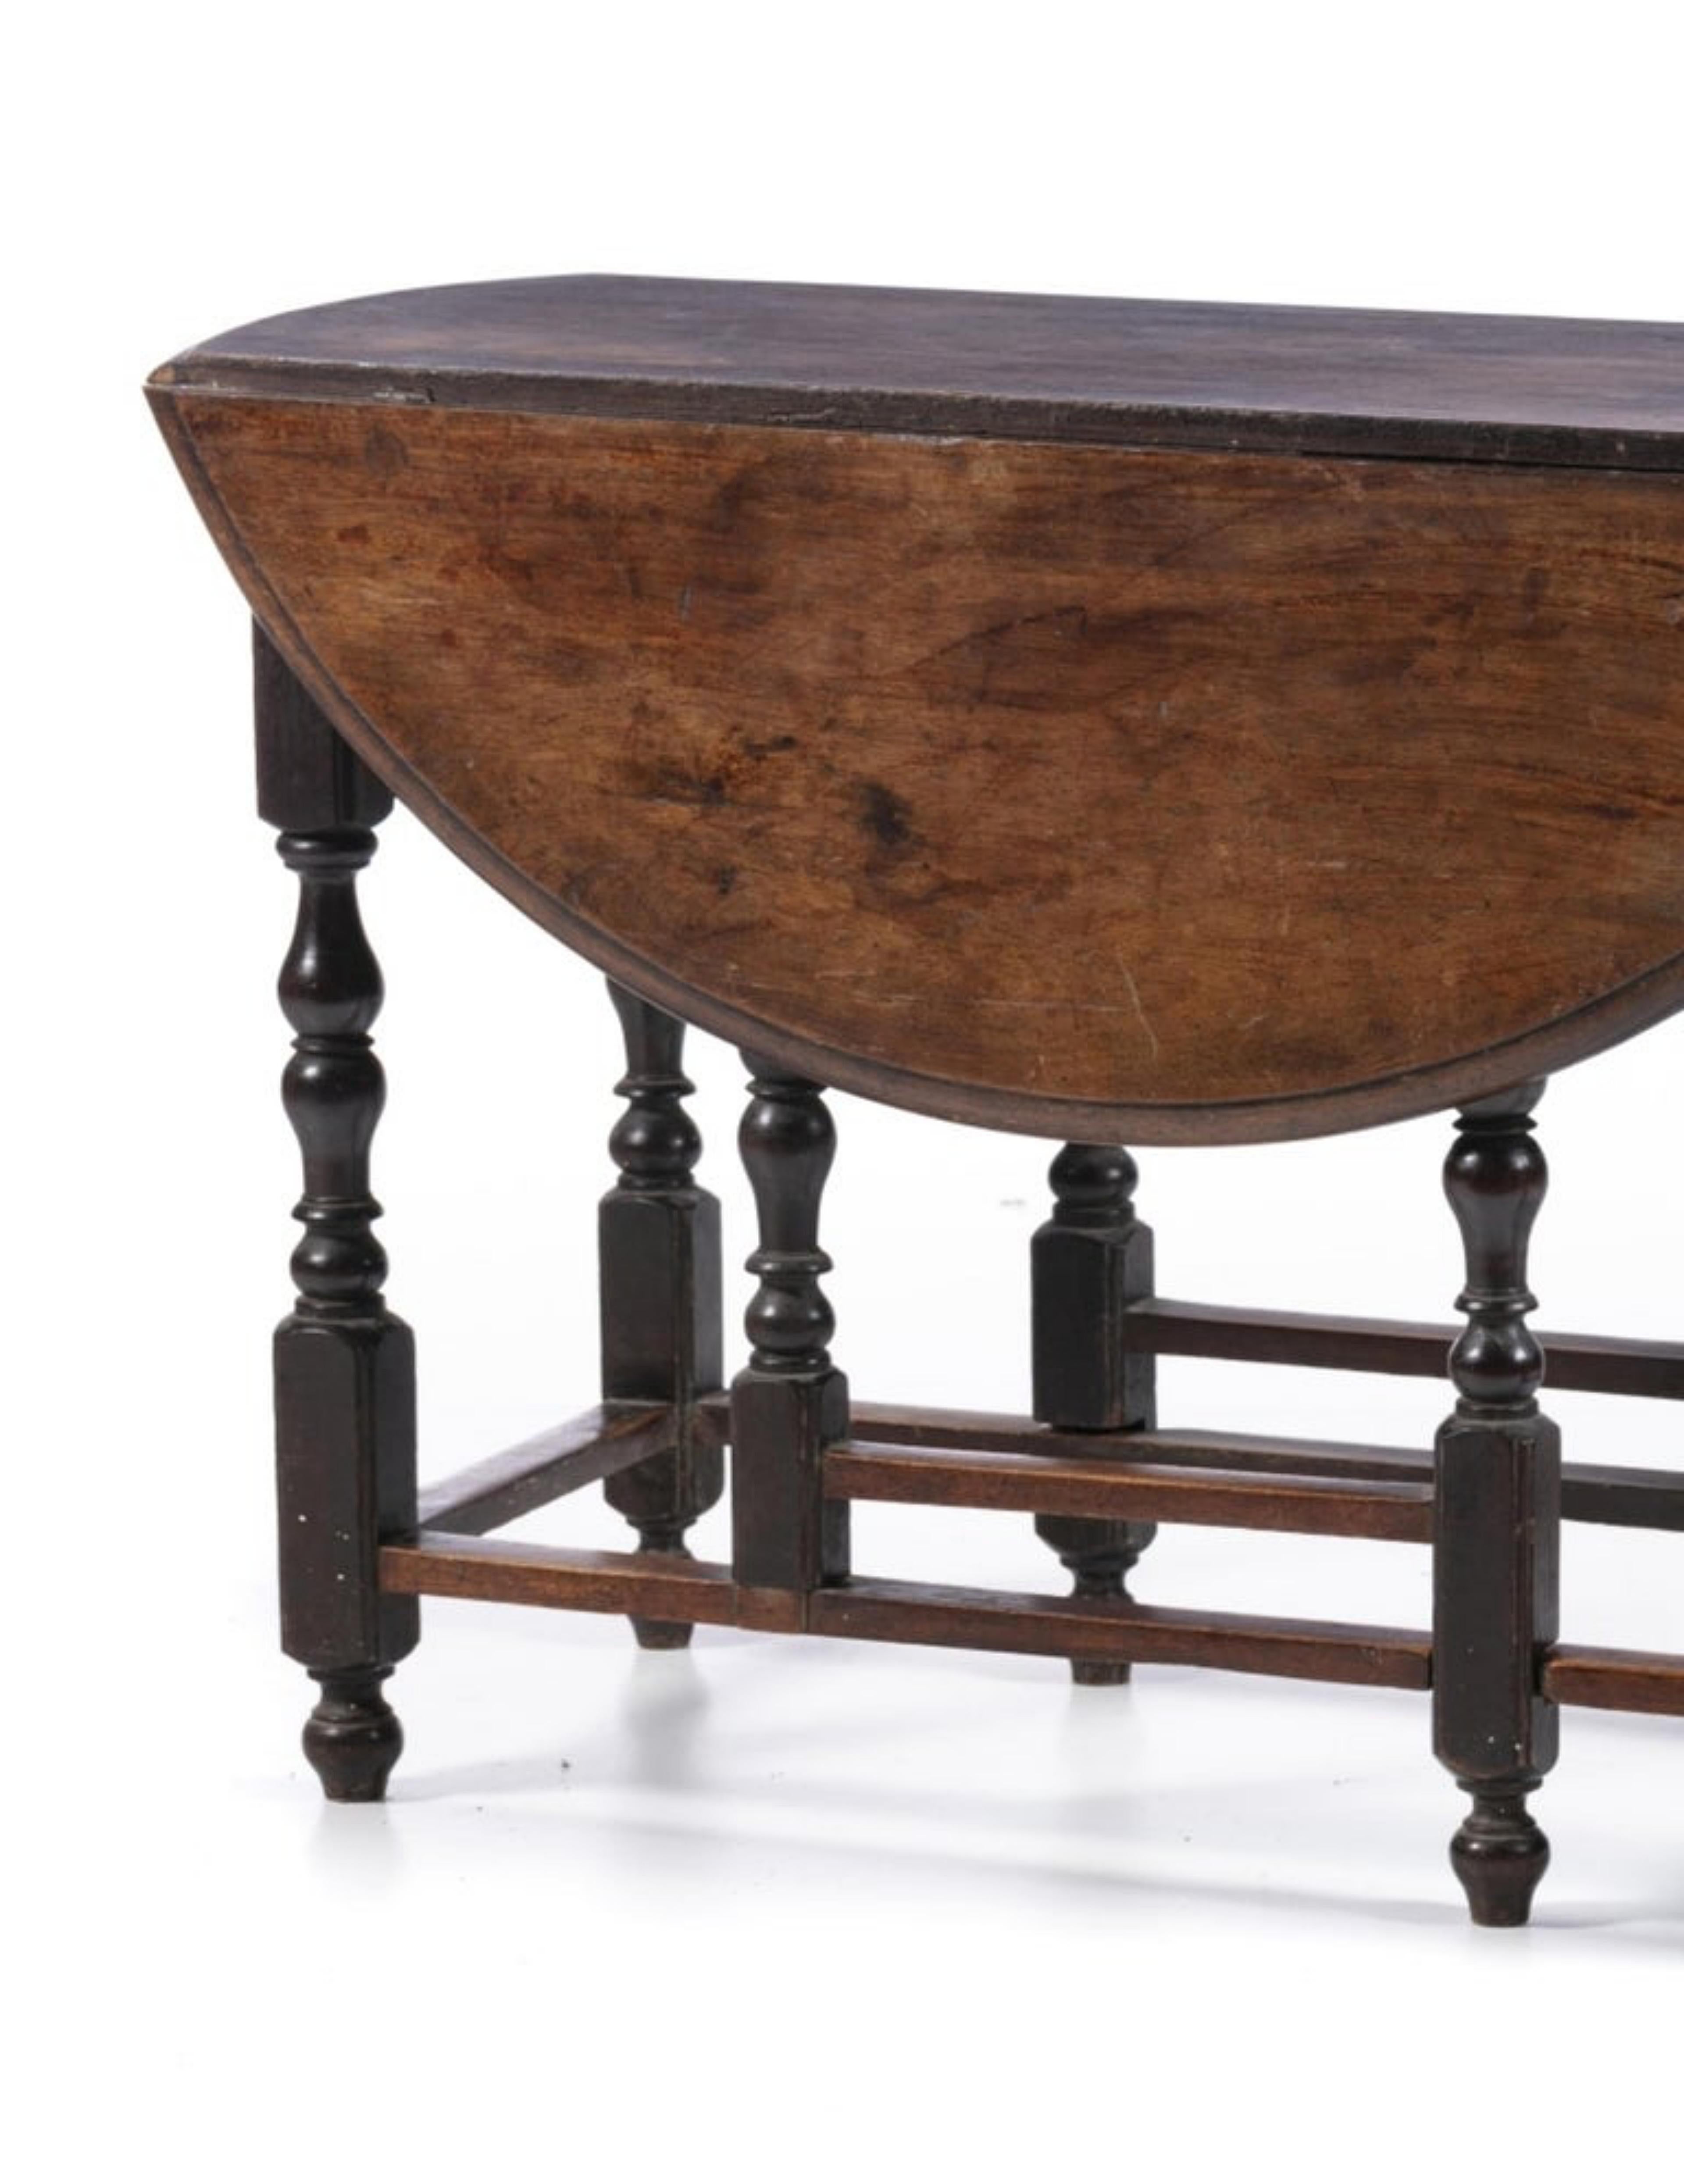 Baroque Portuguese Tab Table from the 17th Century For Sale